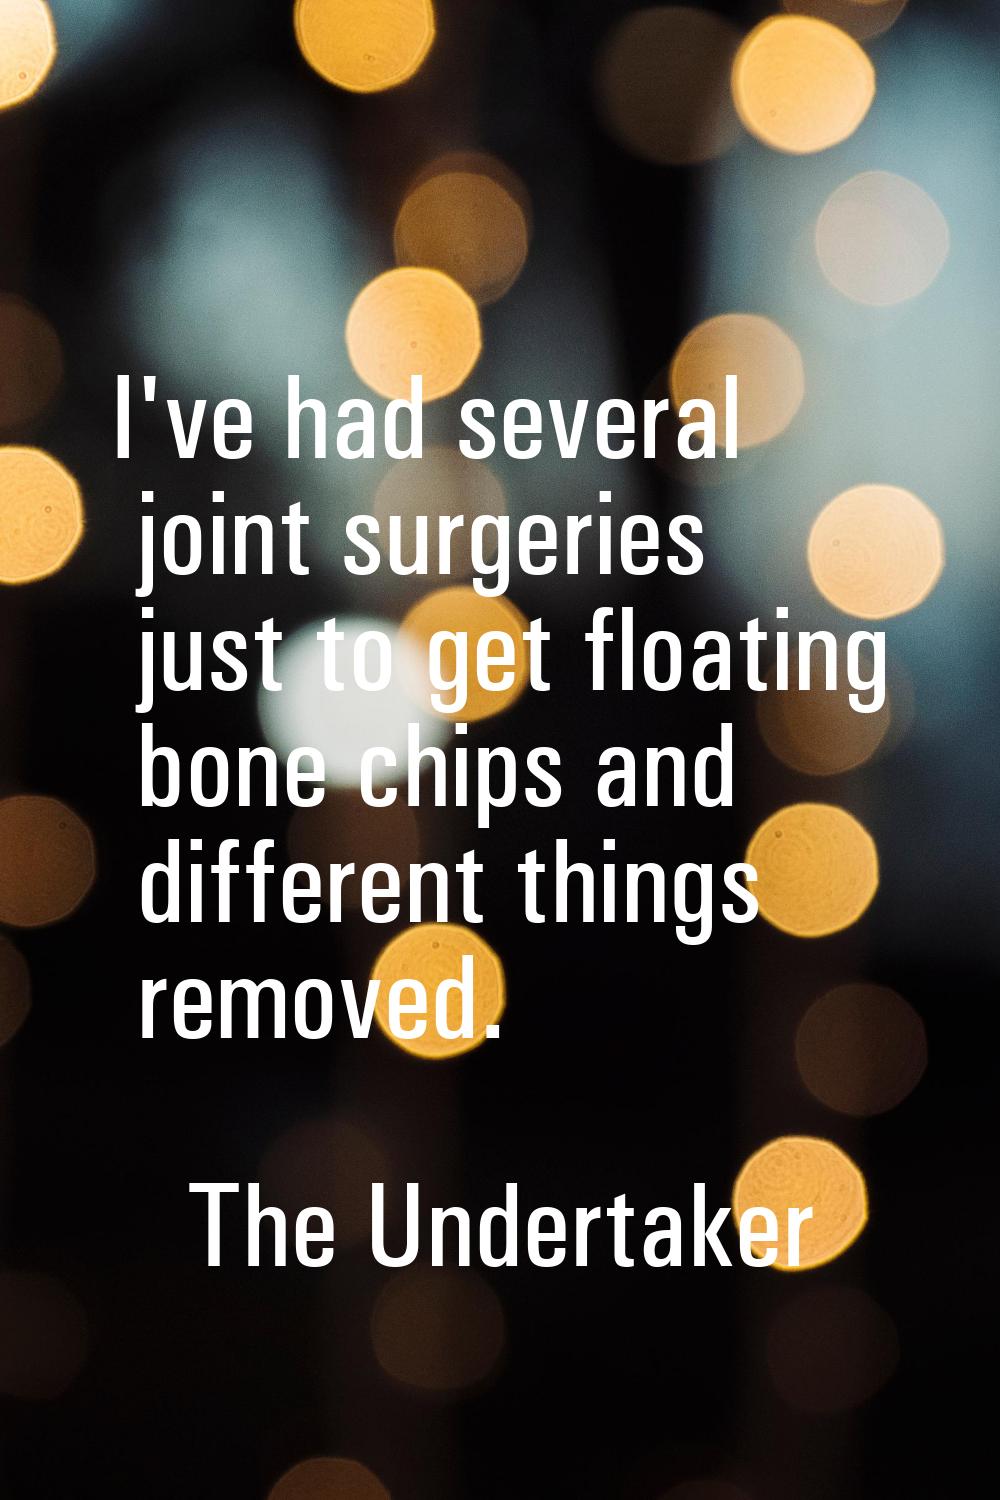 I've had several joint surgeries just to get floating bone chips and different things removed.